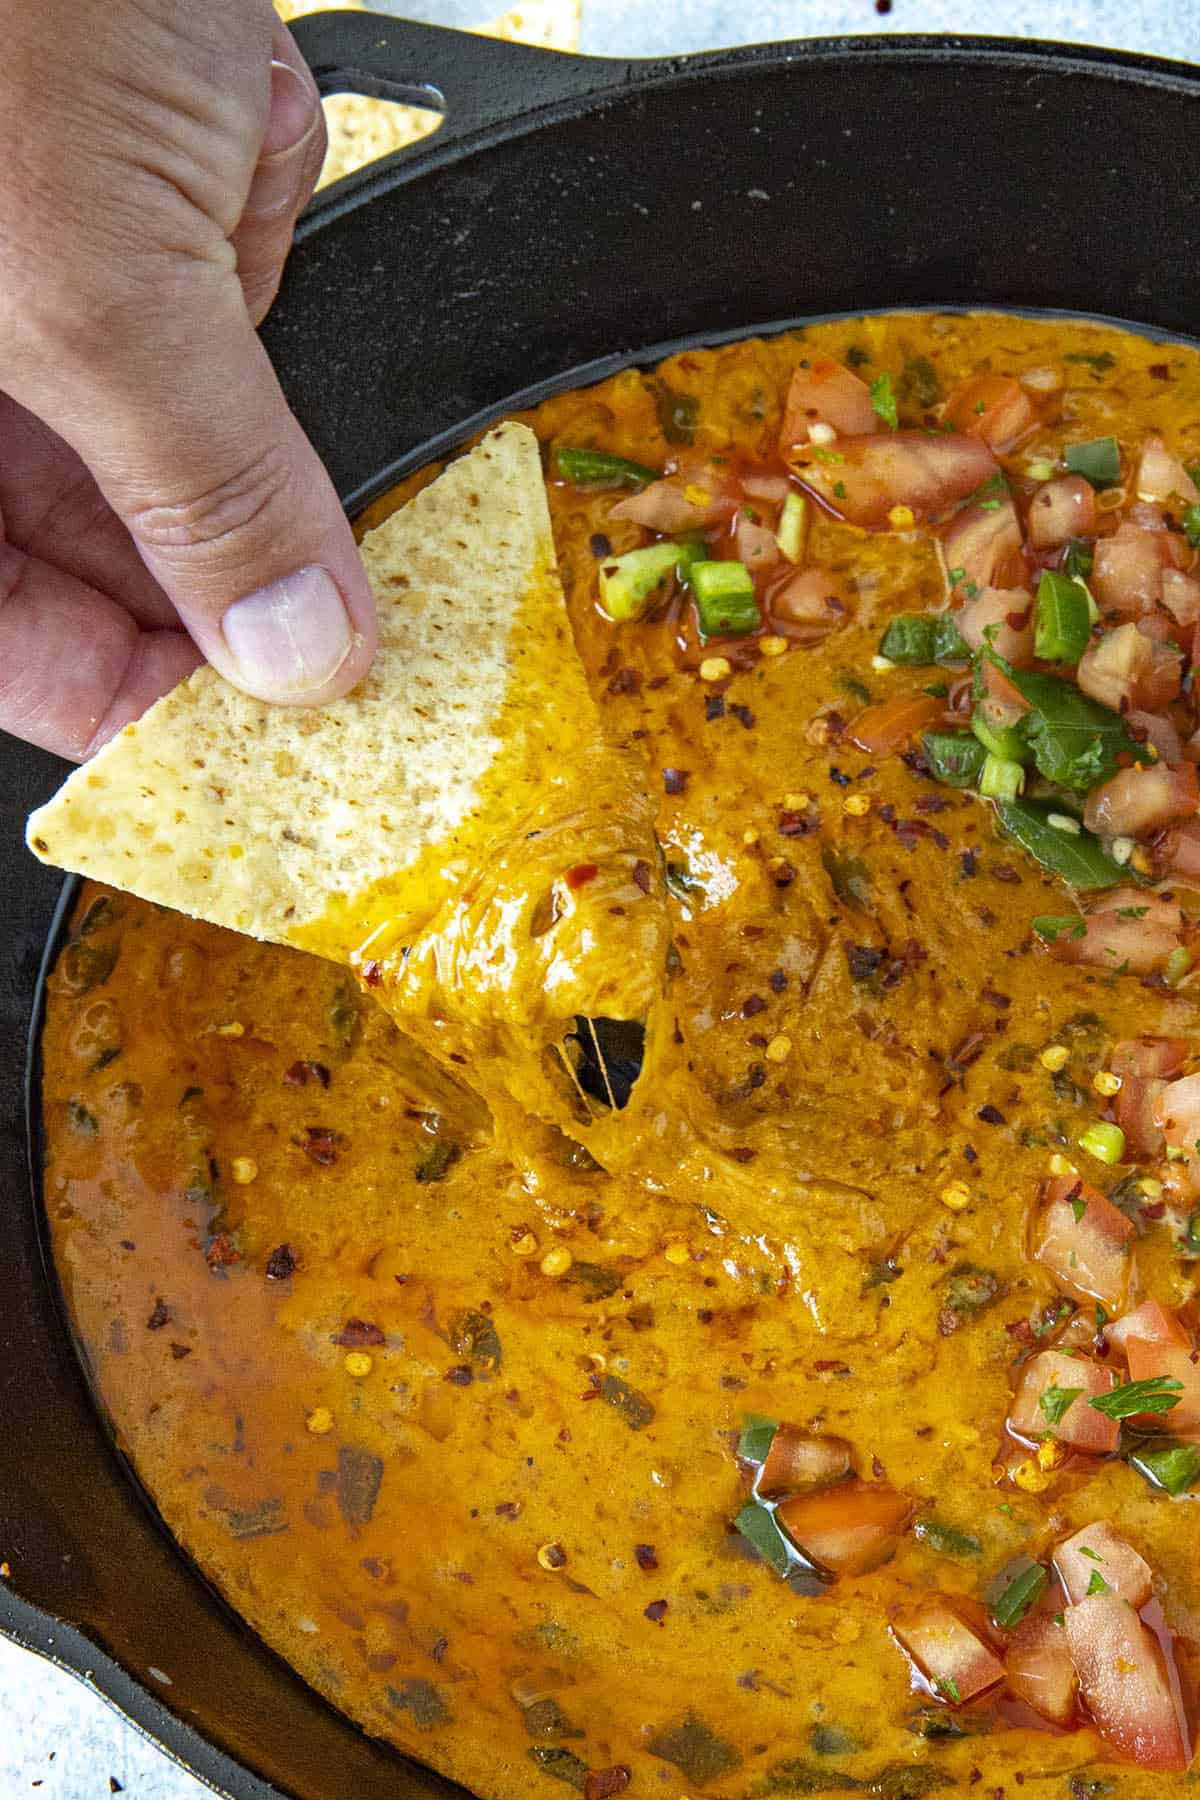 Gooey, cheesy Queso Fundido on a chip